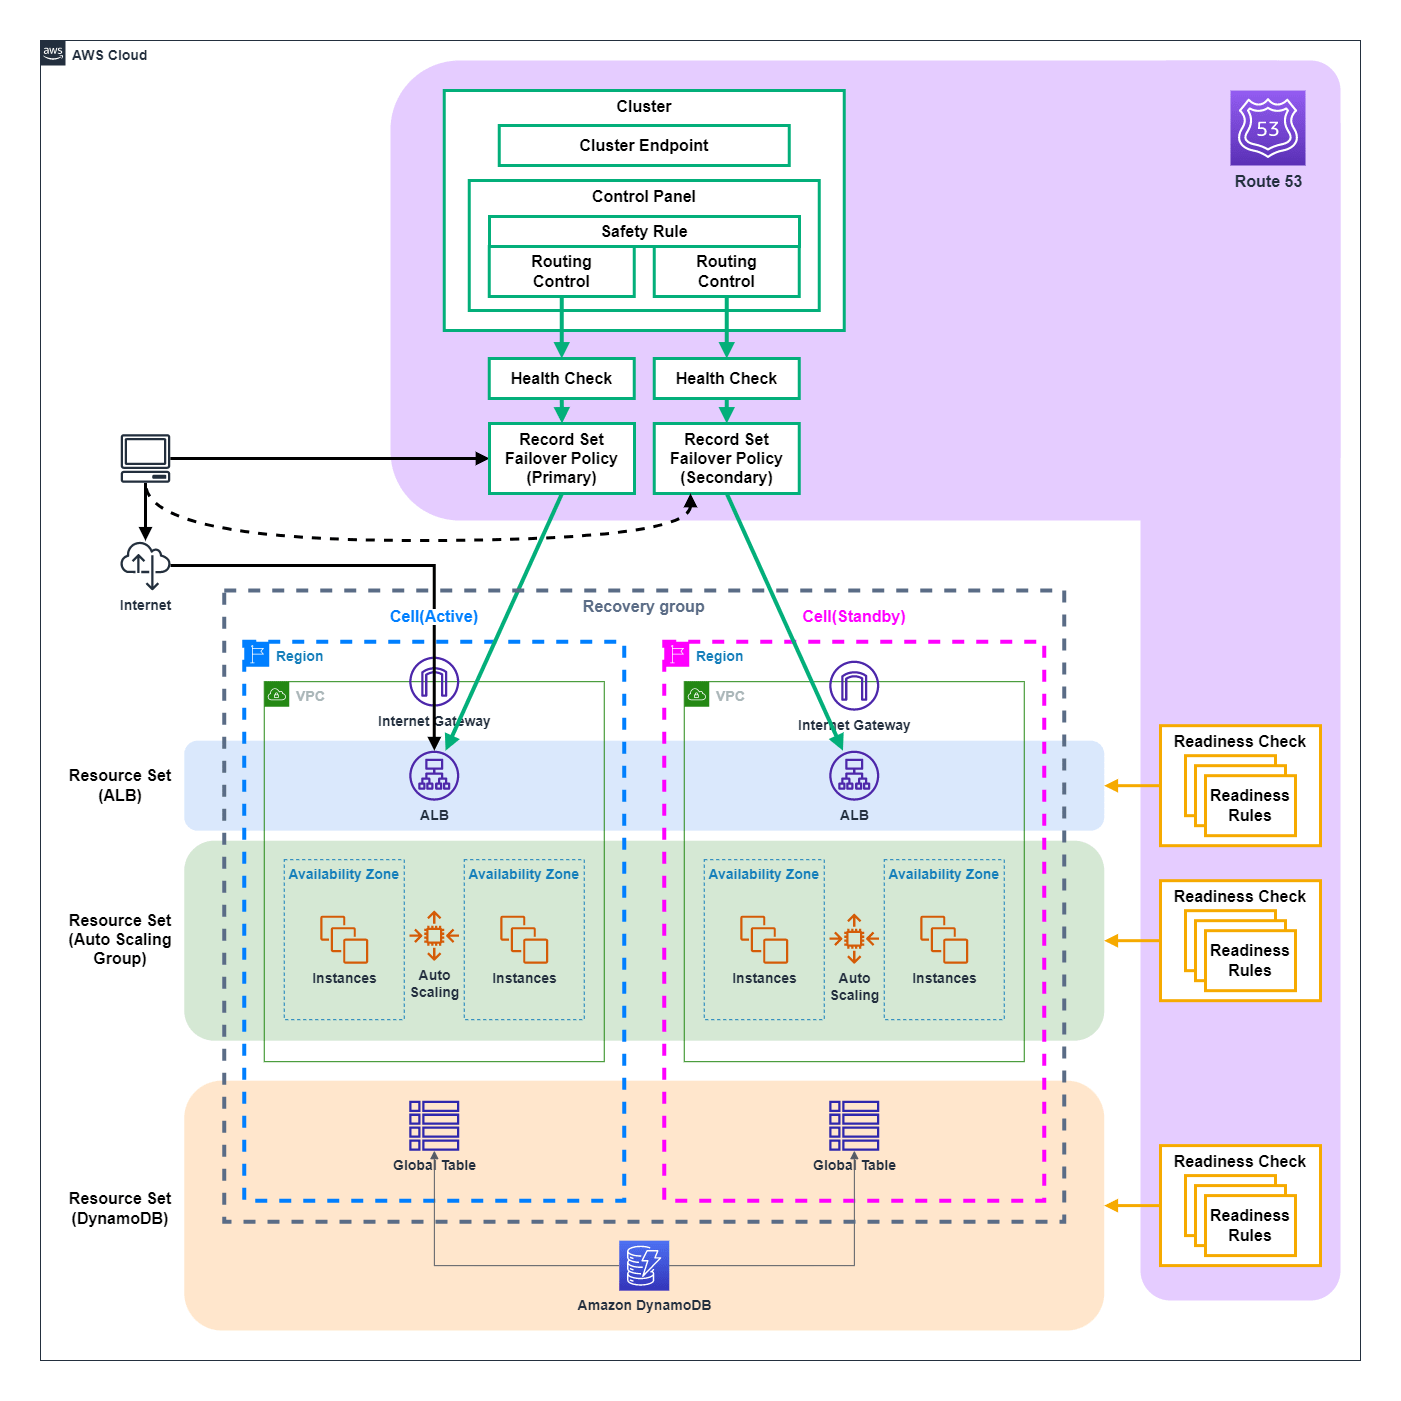 Overview of Readiness Check and Routing Control